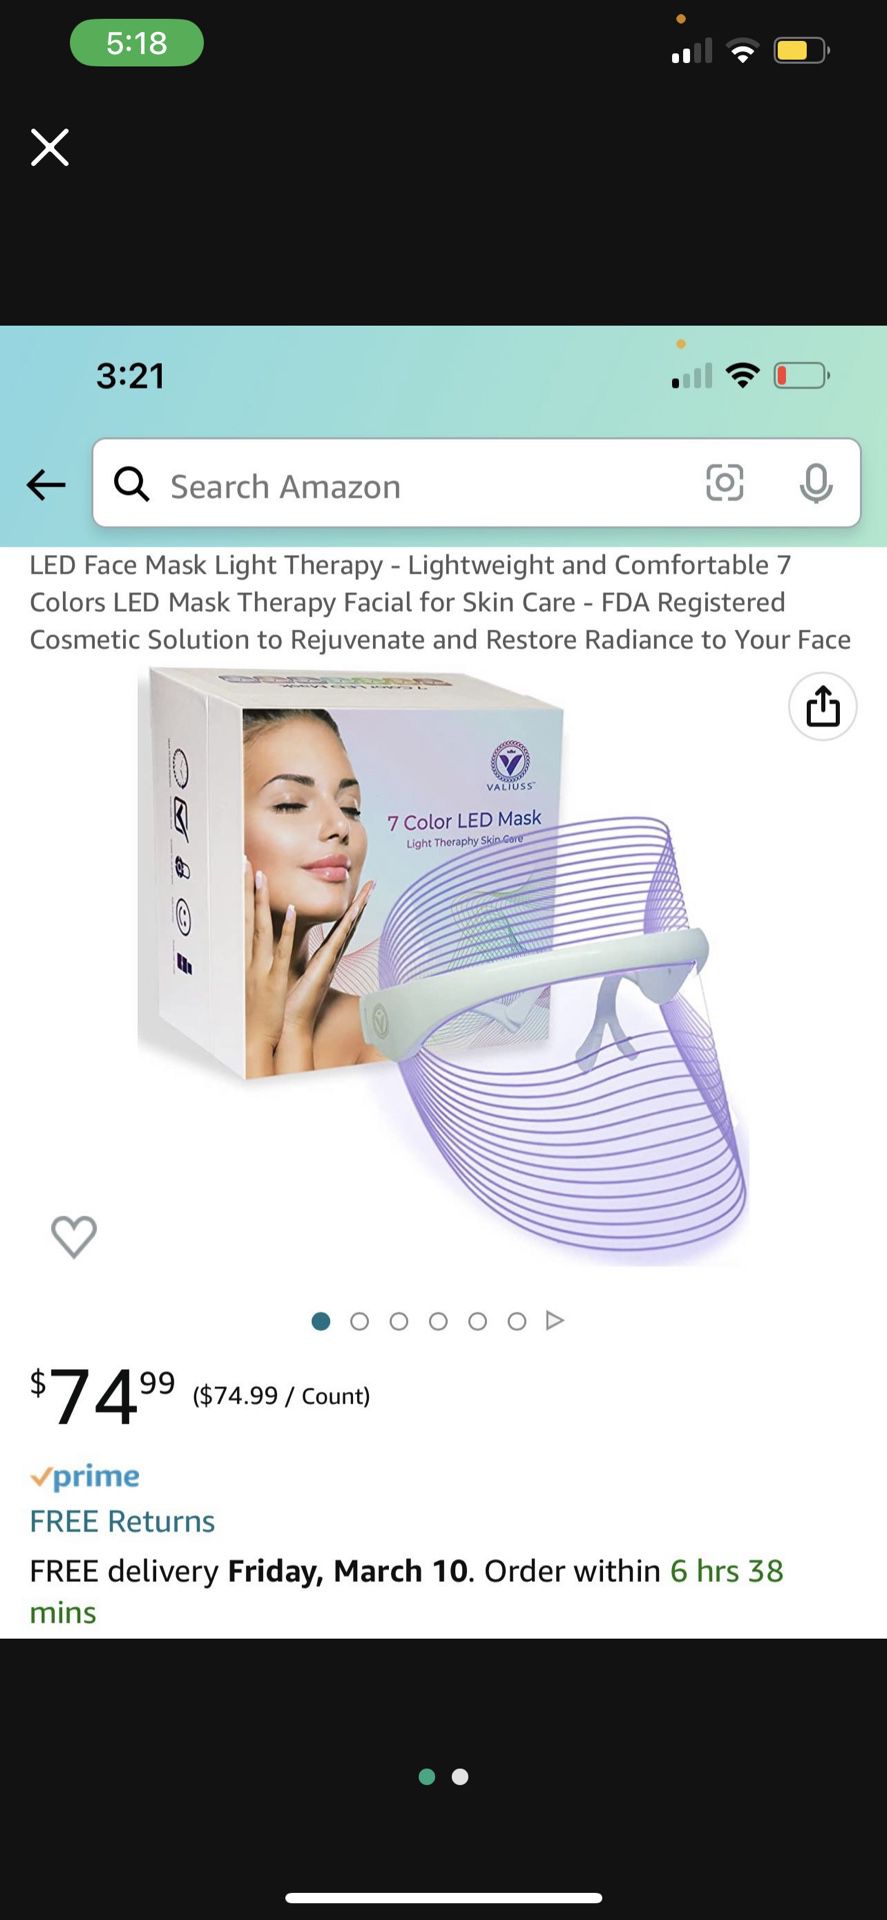 LED Face Mask Light Therapy 